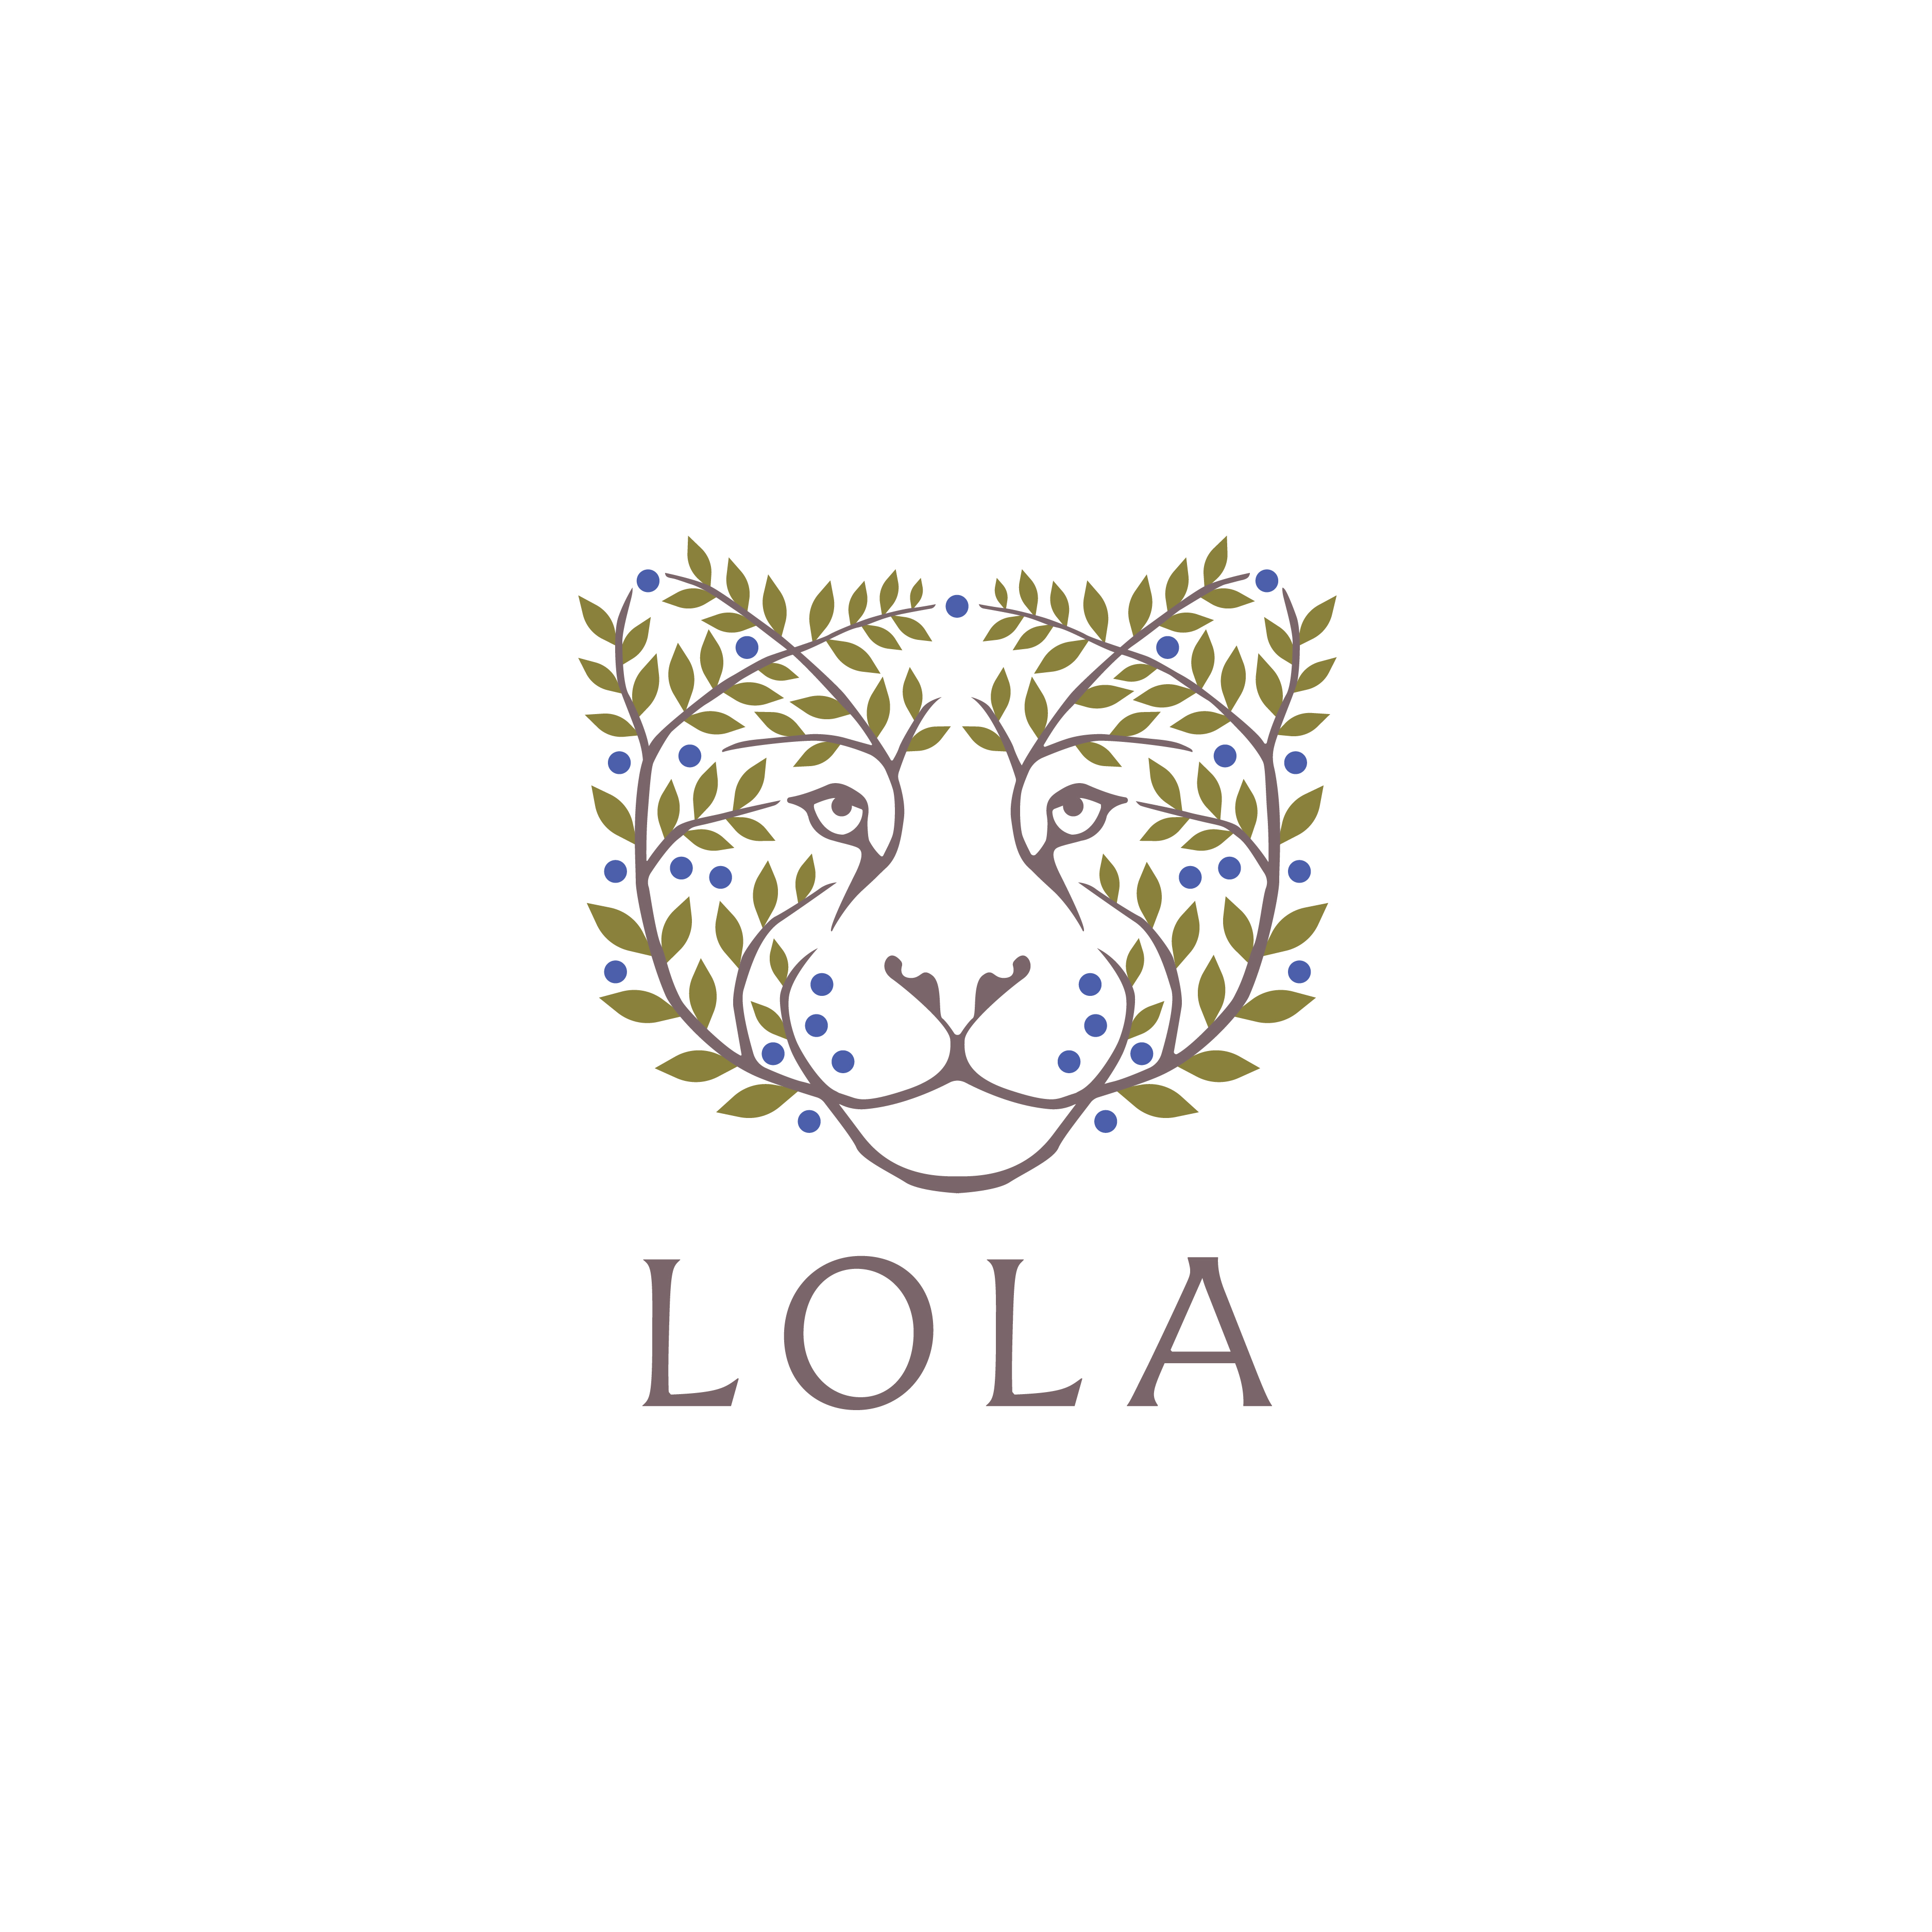 LOLA logo design by logo designer Steely Works for your inspiration and for the worlds largest logo competition